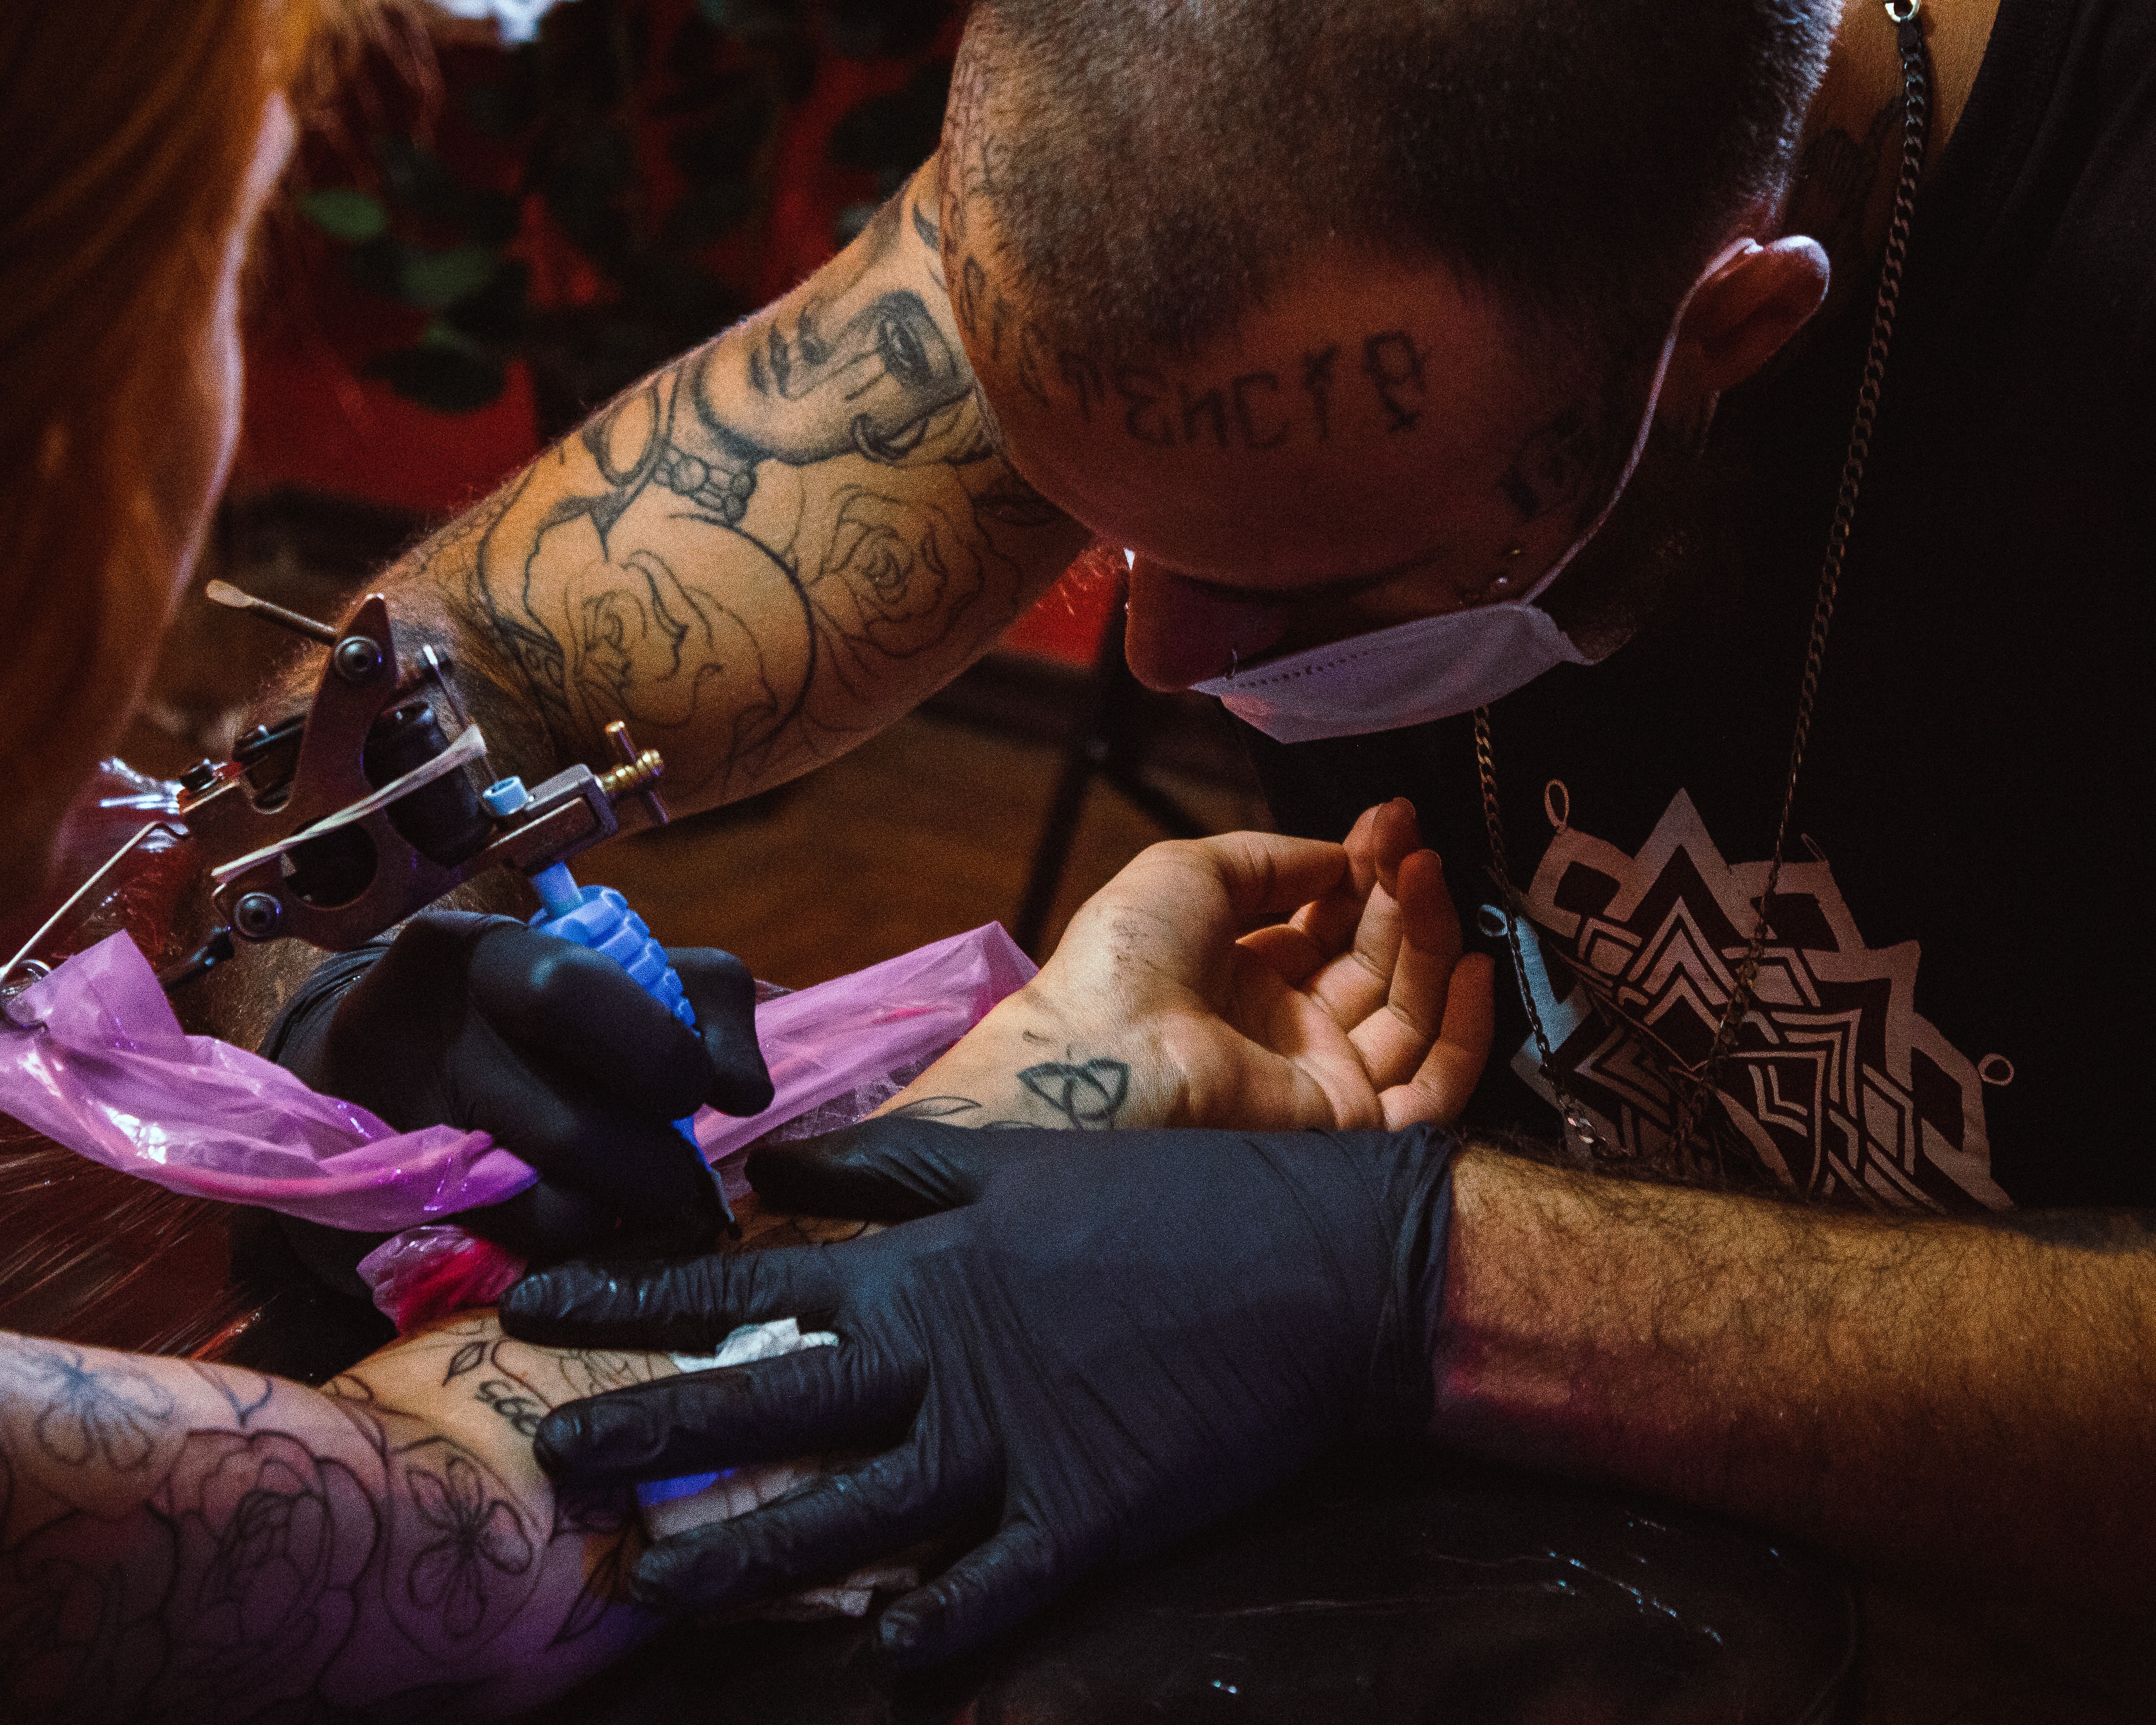 tattooing with mask on